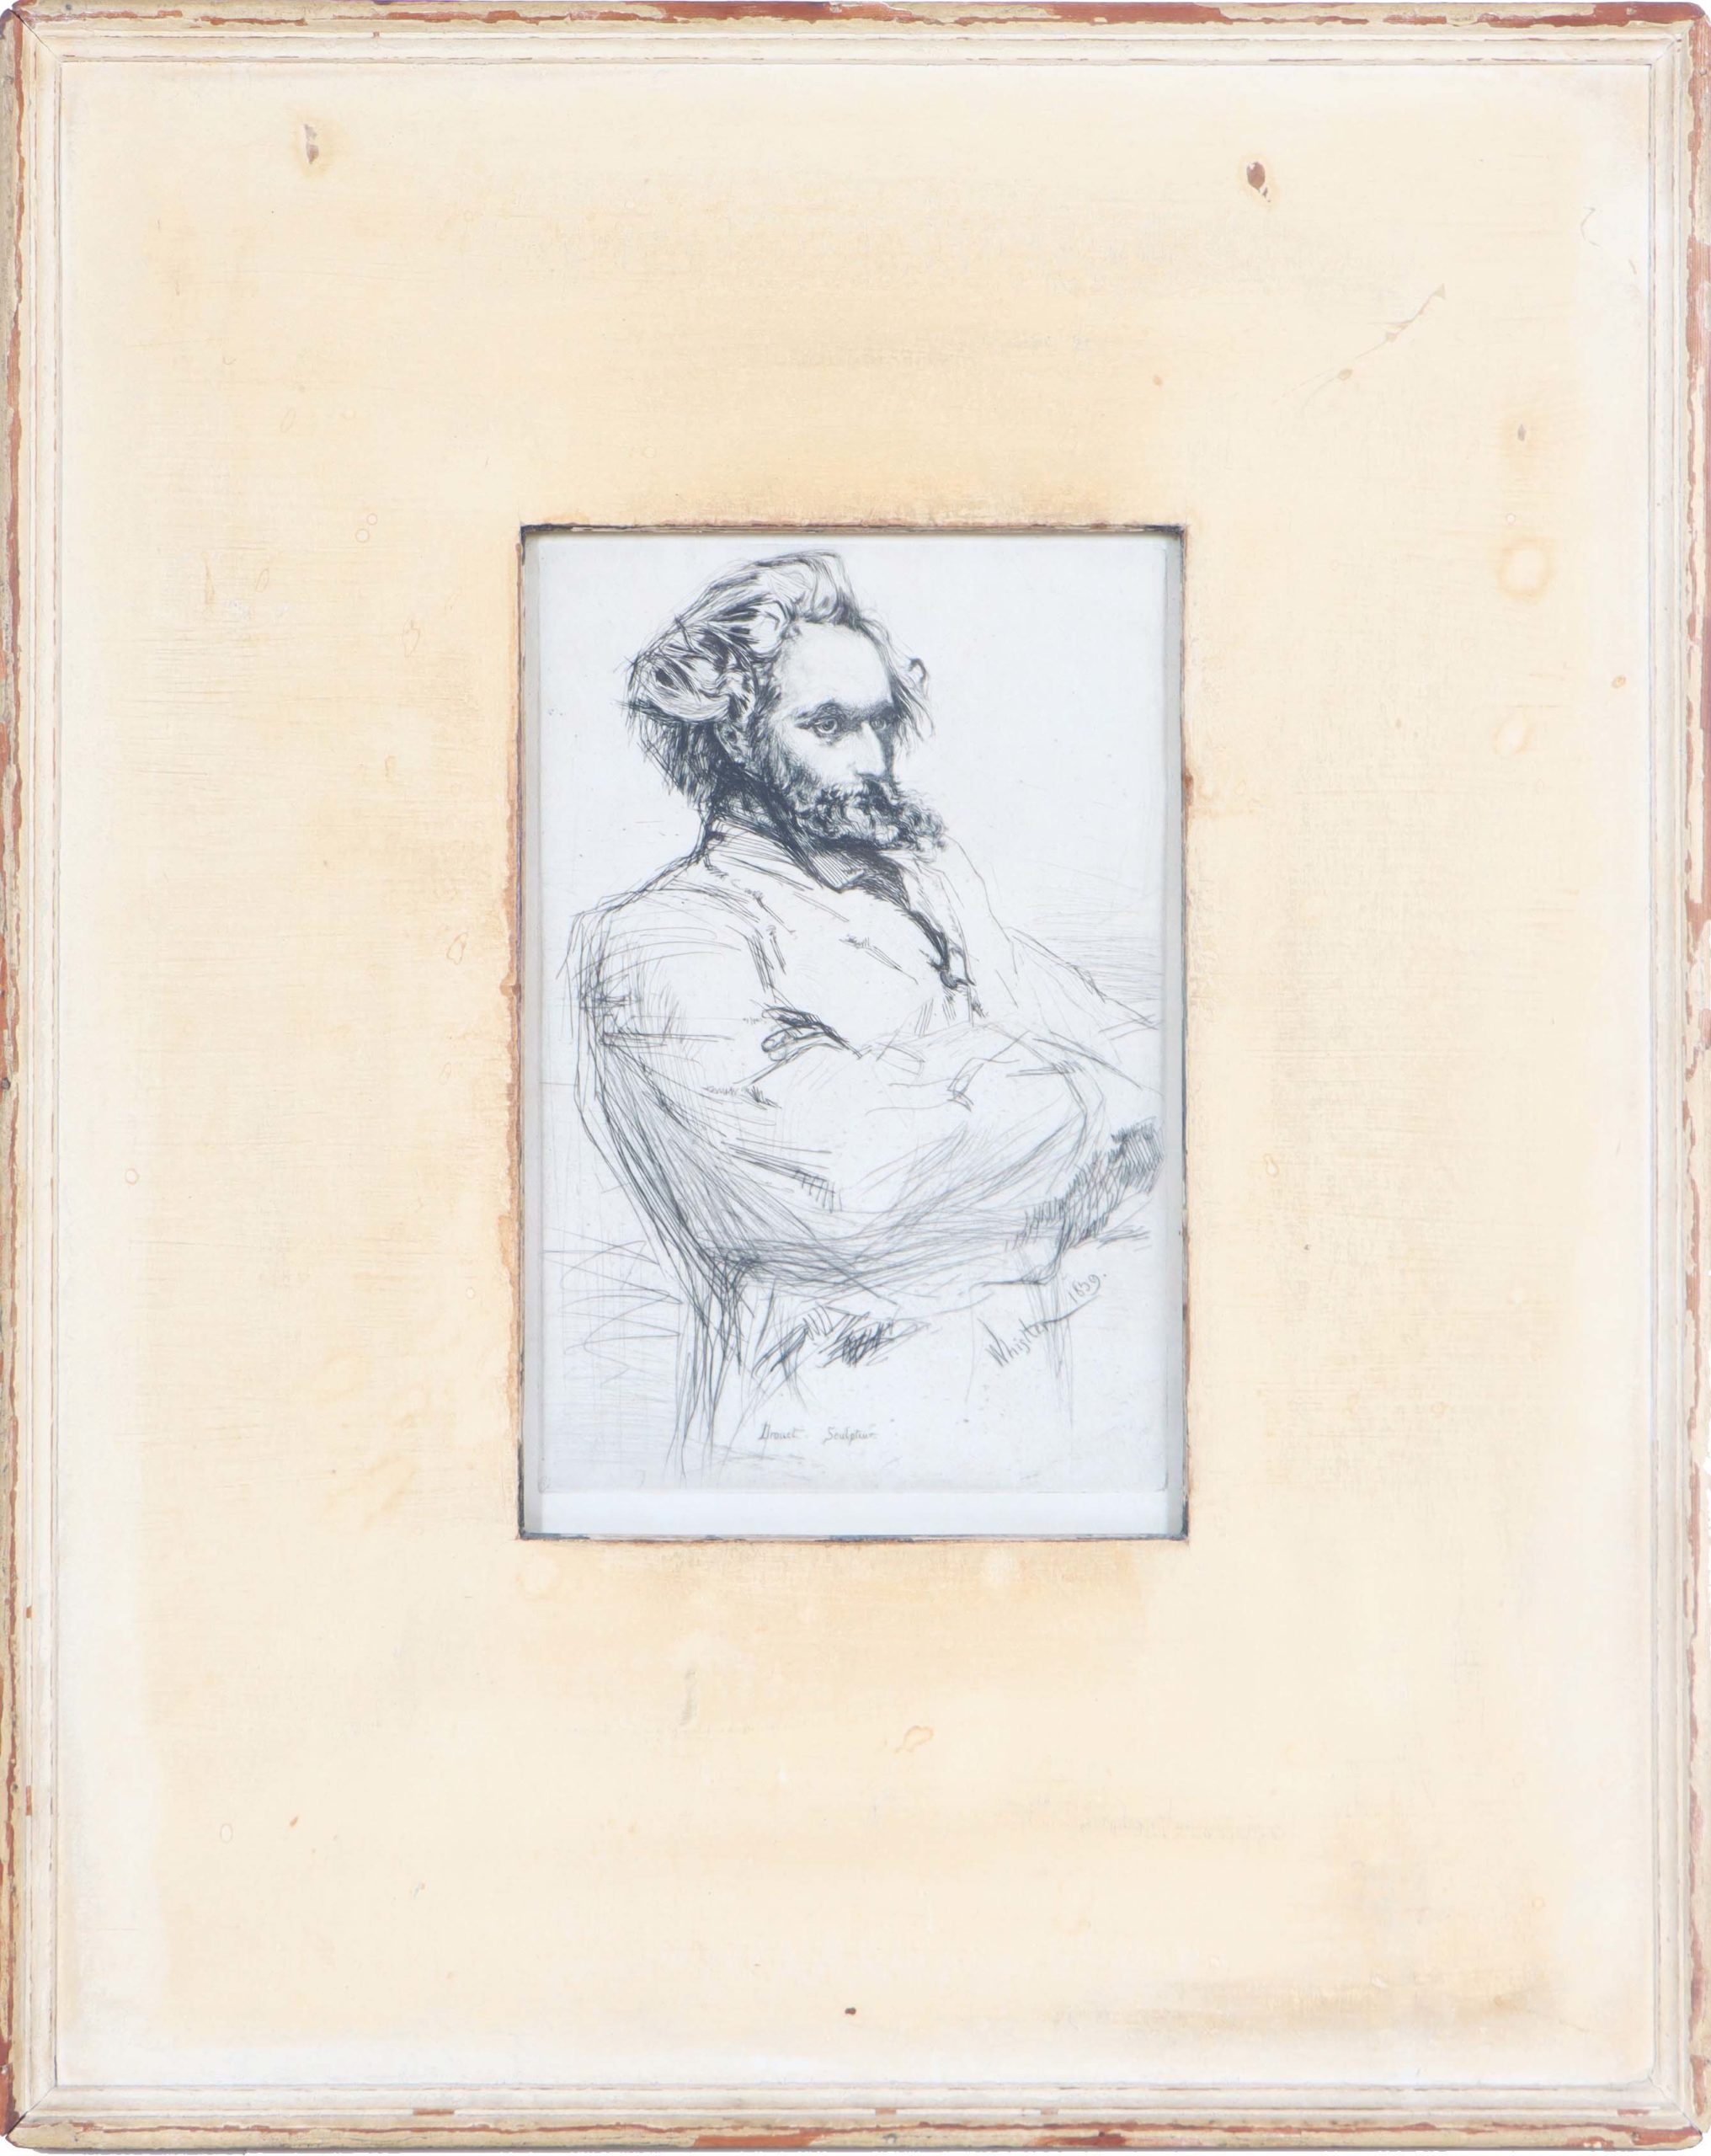 You are currently viewing James Abbott McNeill Whistler (1834-1903) American – Etching “Drouet Sculpteur” 1859